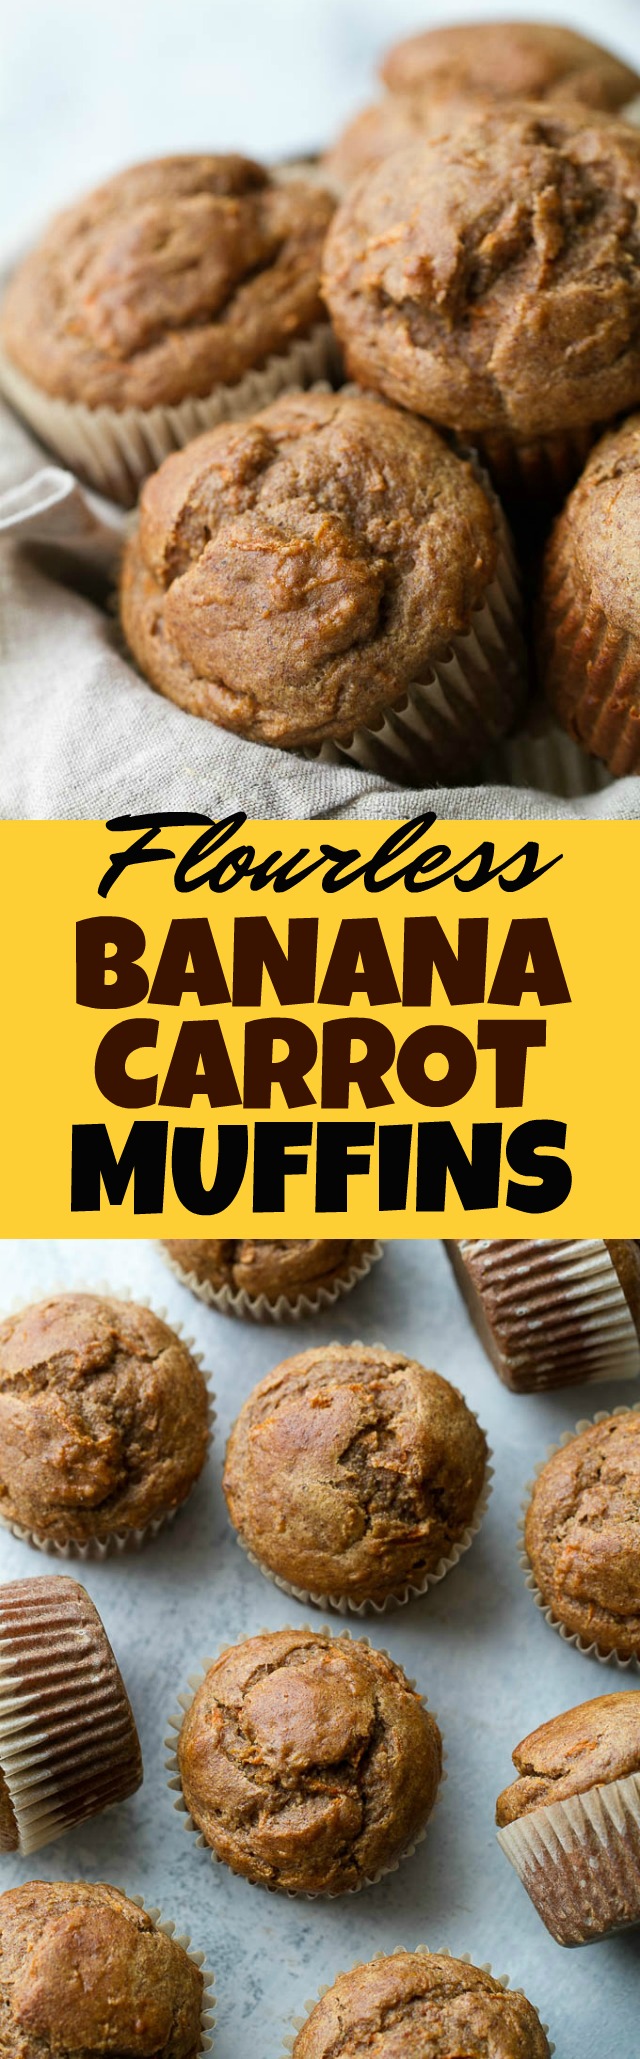 Flourless banana carrot muffins that are so tender and flavourful, you’d never know they were made without flour, oil, or refined sugar. Gluten free and made with wholesome ingredients, they make a healthy and delicious breakfast or snack | runningwithspoons.com #glutenfree #healthy #recipe